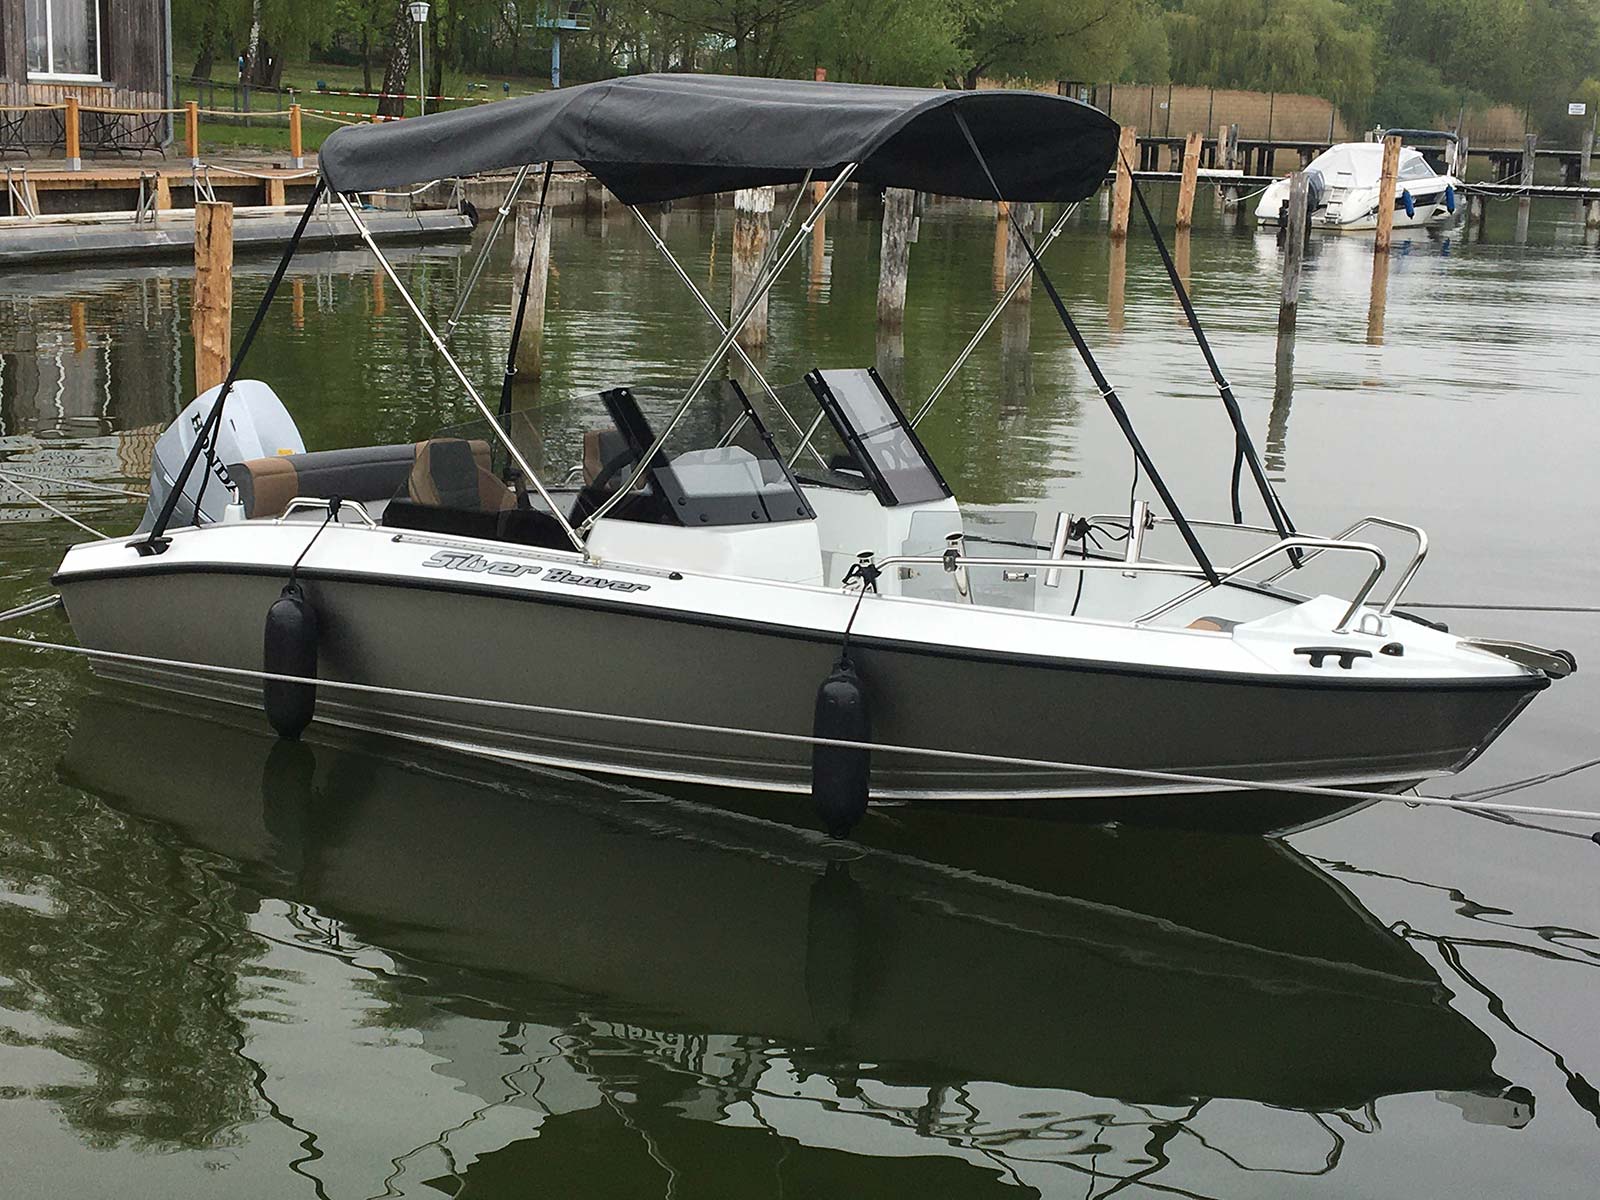 SALE: Silver Beaver BR | Boat Solutions, Utting am Ammersee